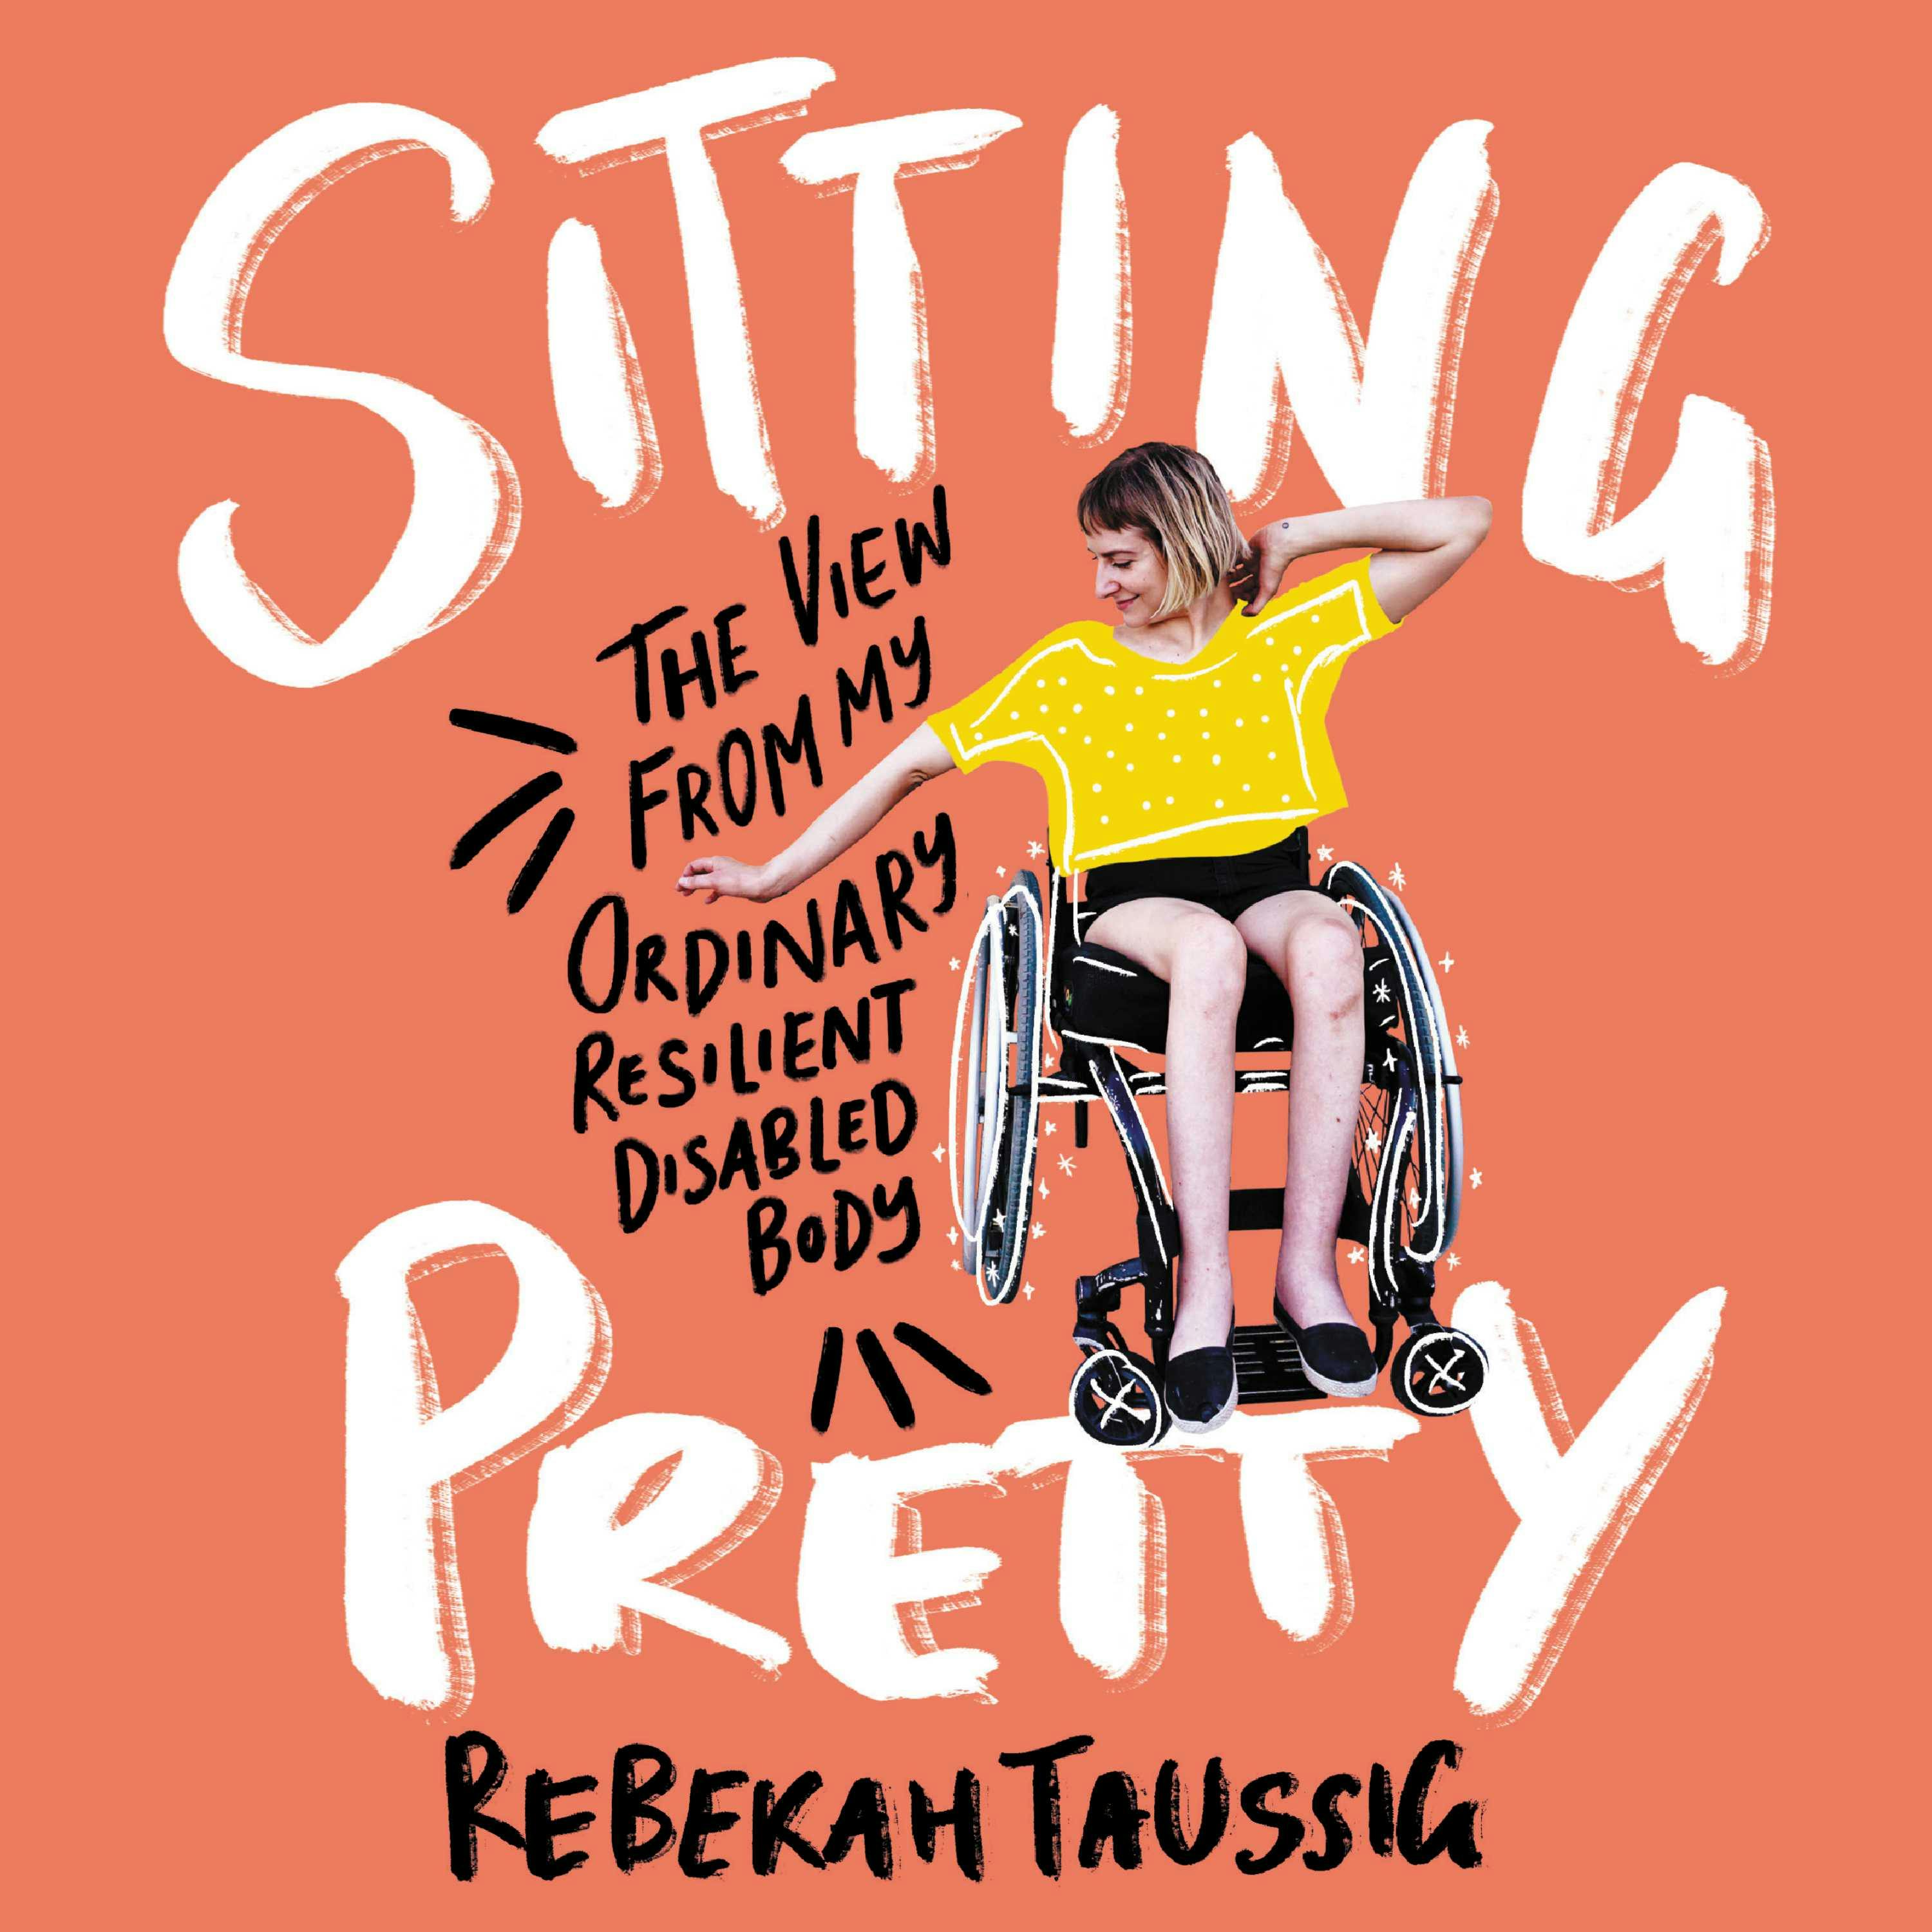 Sitting Pretty: The View from My Ordinary, Resilient, Disabled Body - Rebekah Taussig